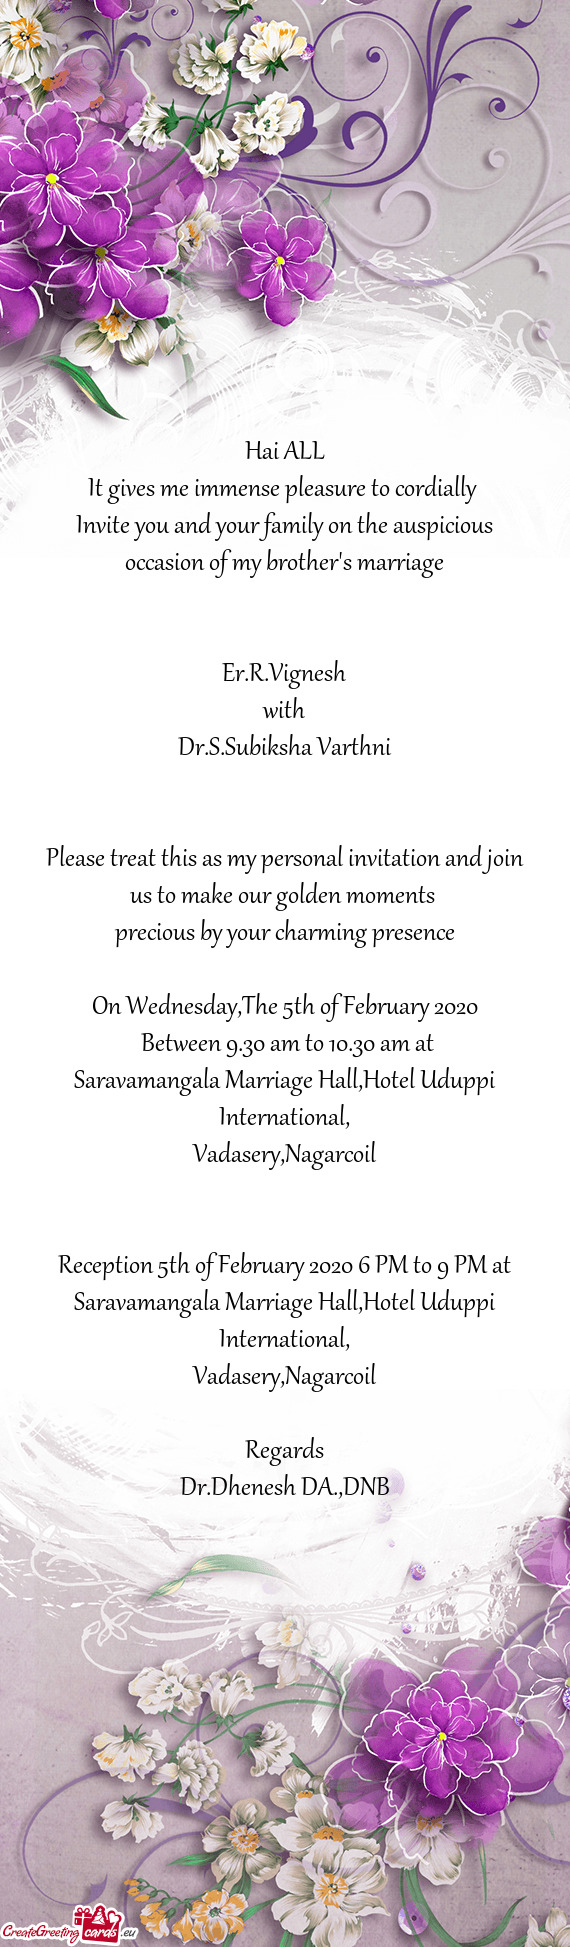 Please treat this as my personal invitation and join us to make our golden moments